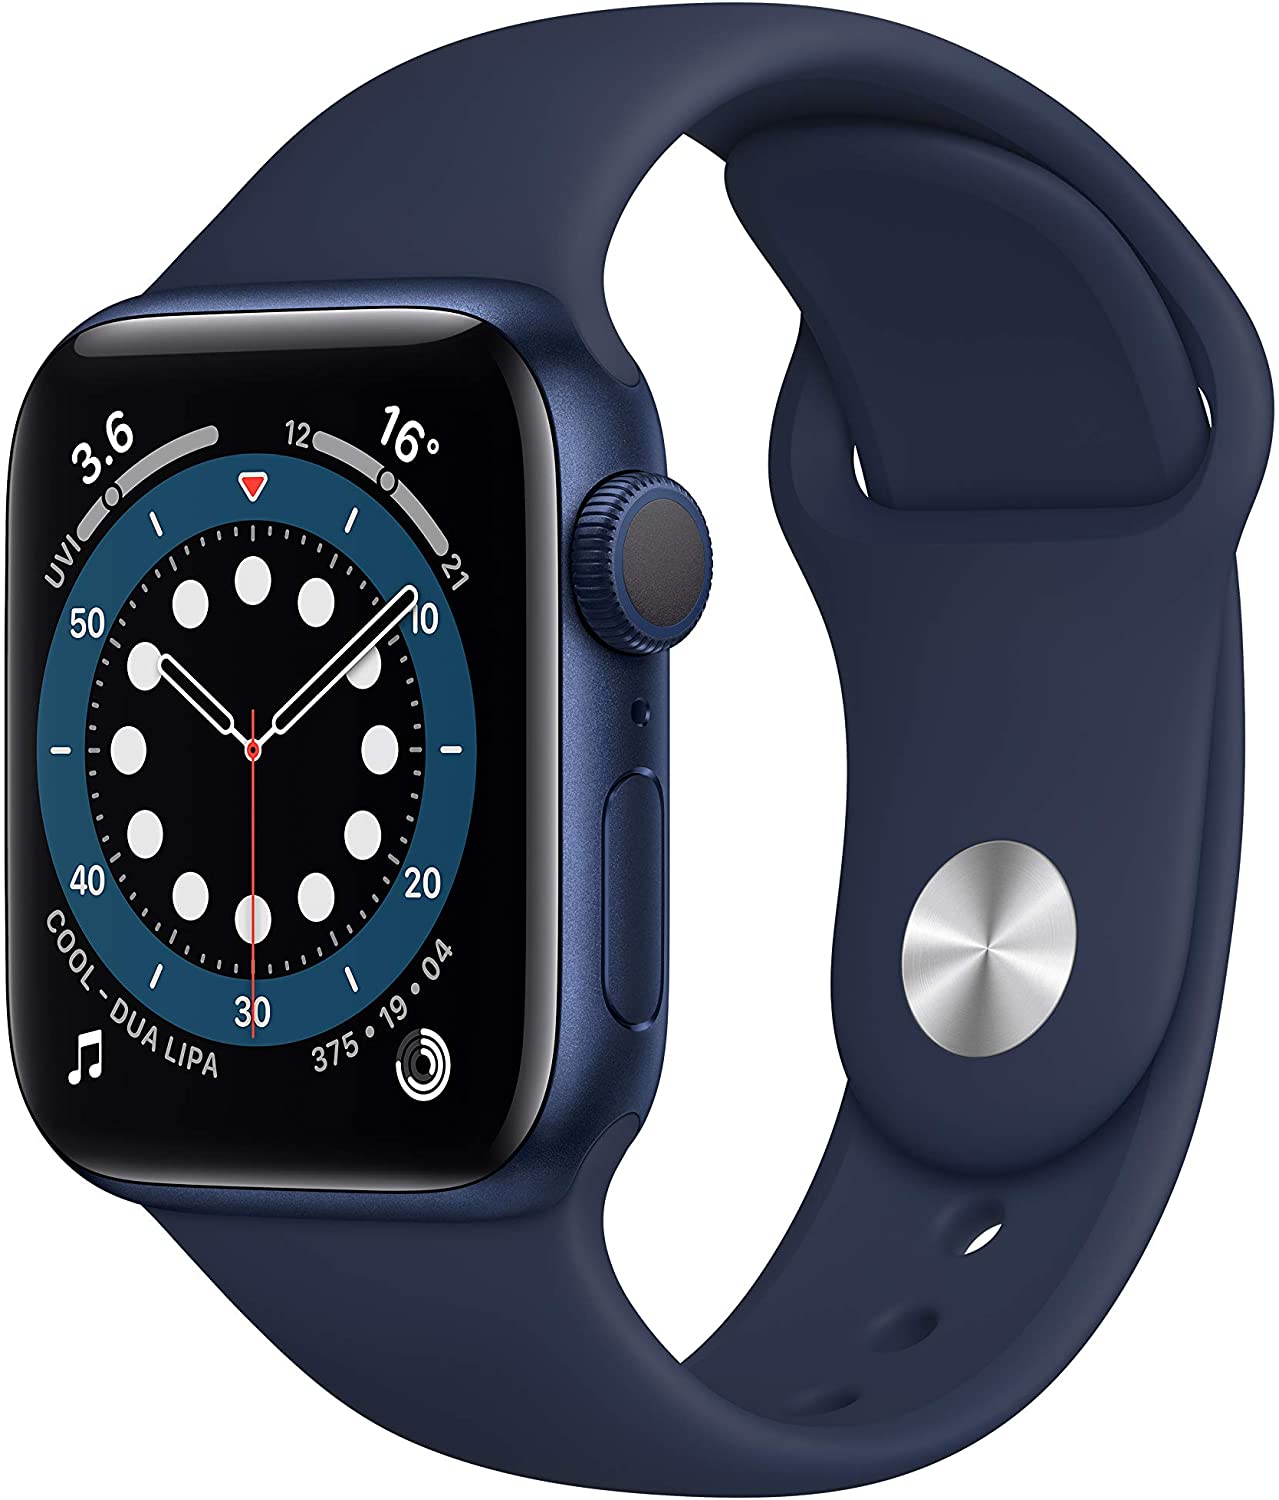 apple watch father's day gift